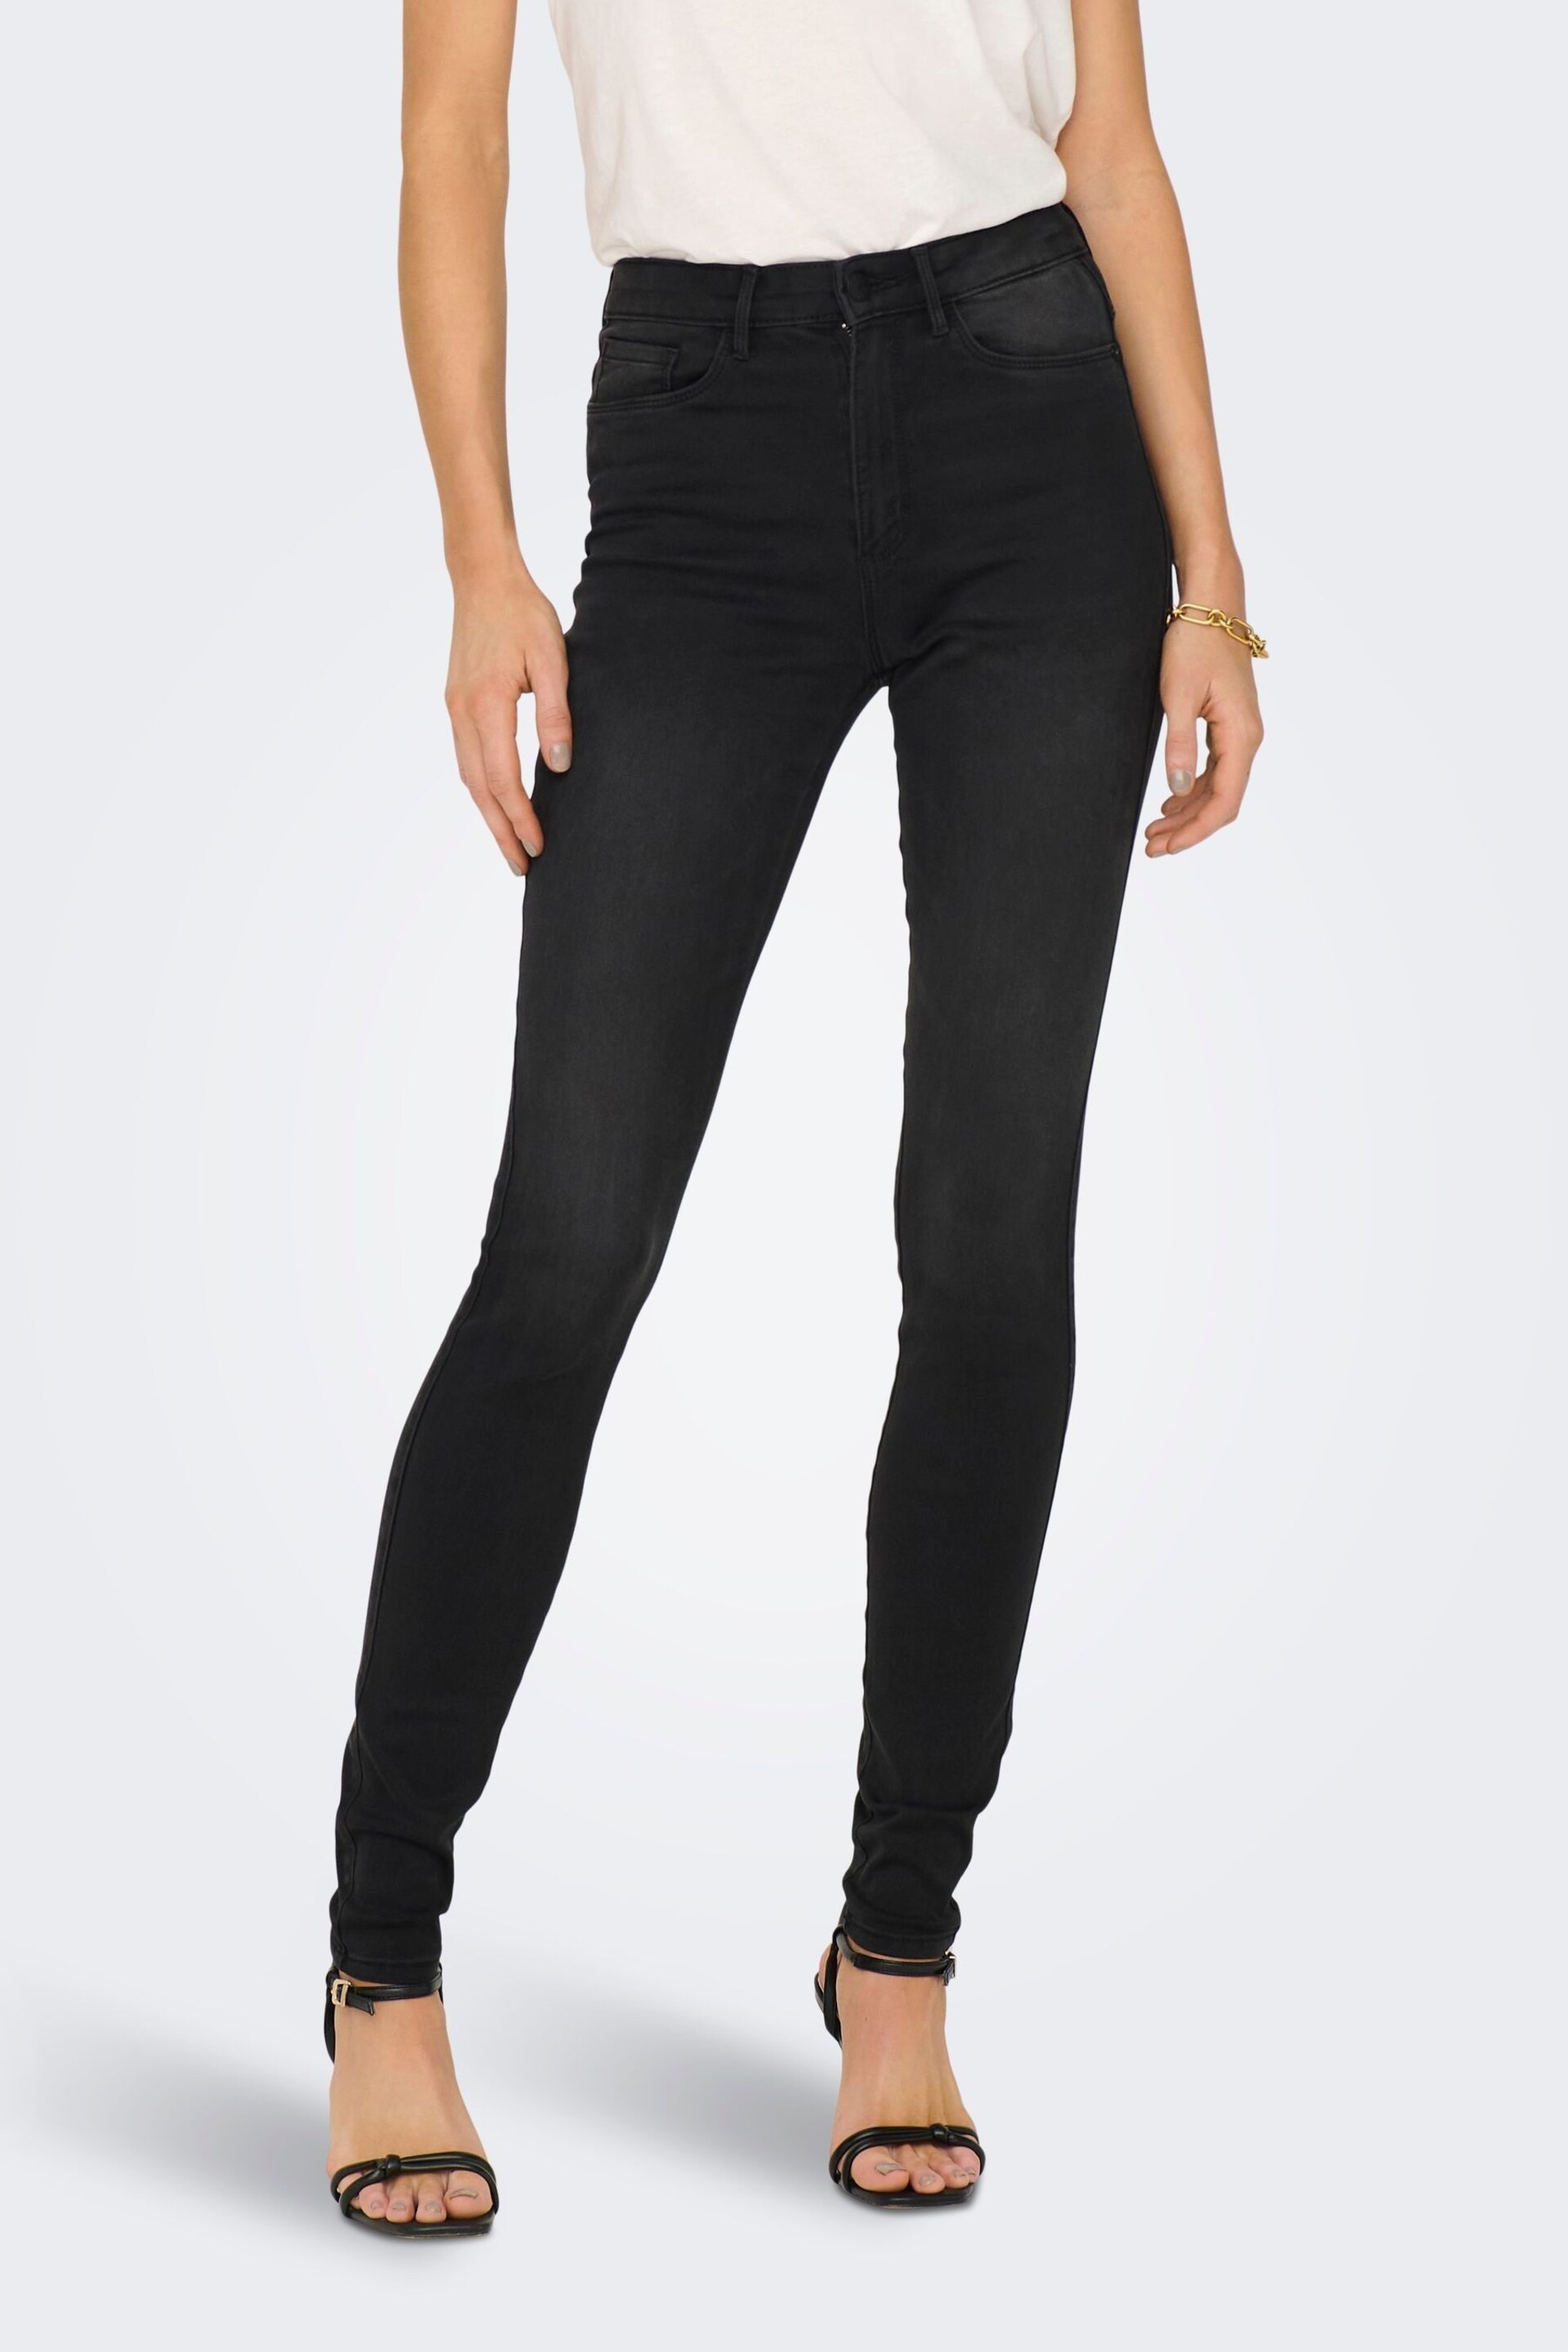 ONLY Black High Waisted Stretch Skinny Jeans - Image 2 of 5